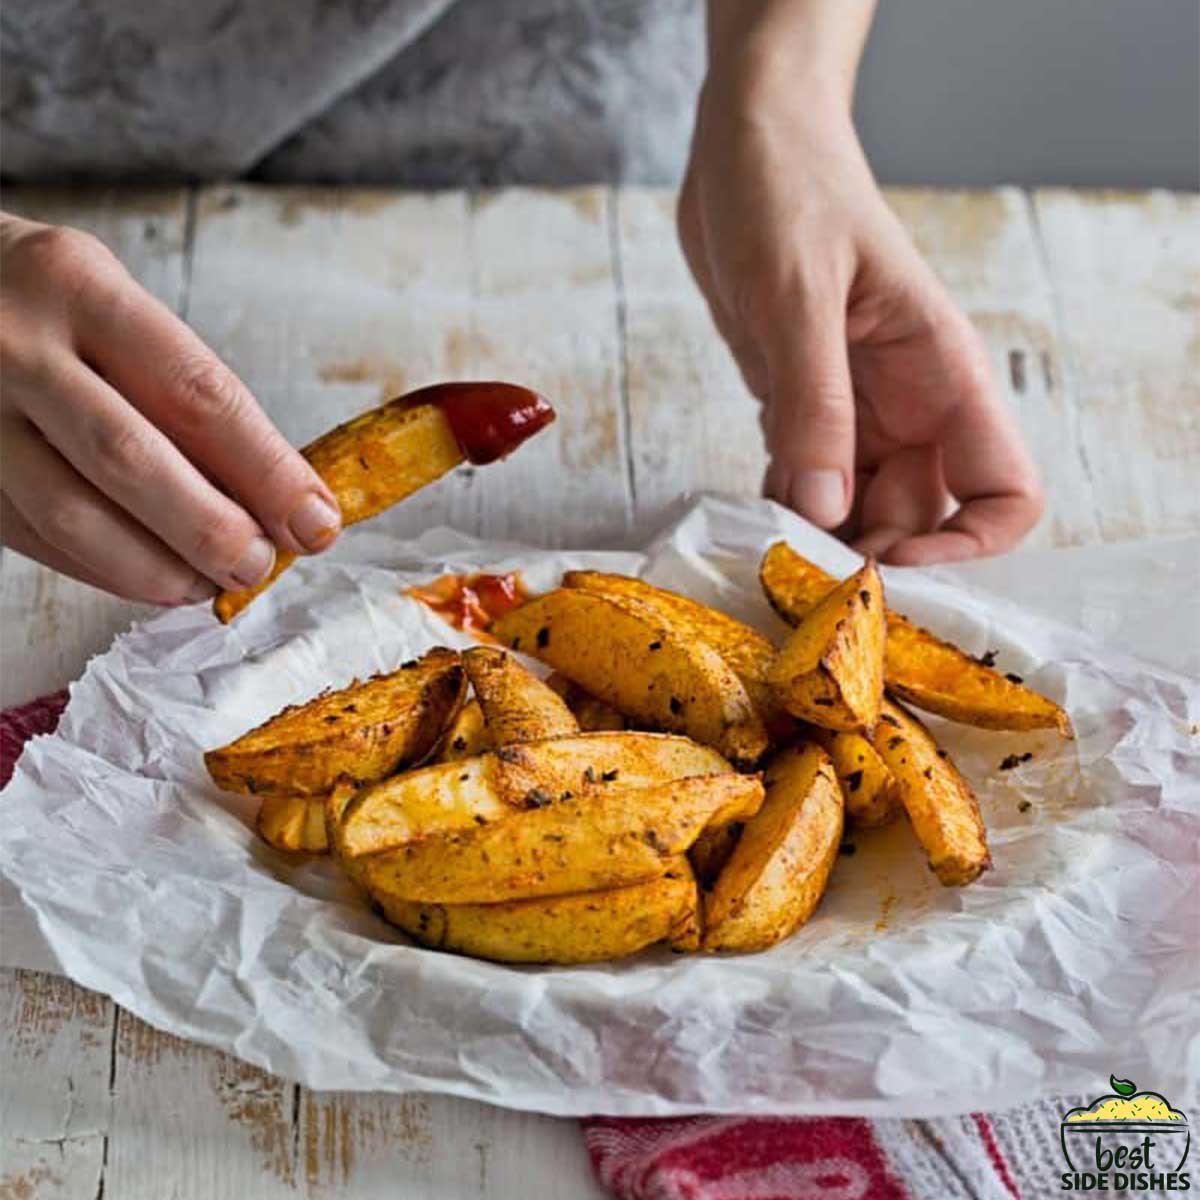 lifting a potato wedge dipped in ketchup over a plate of crispy potato wedges